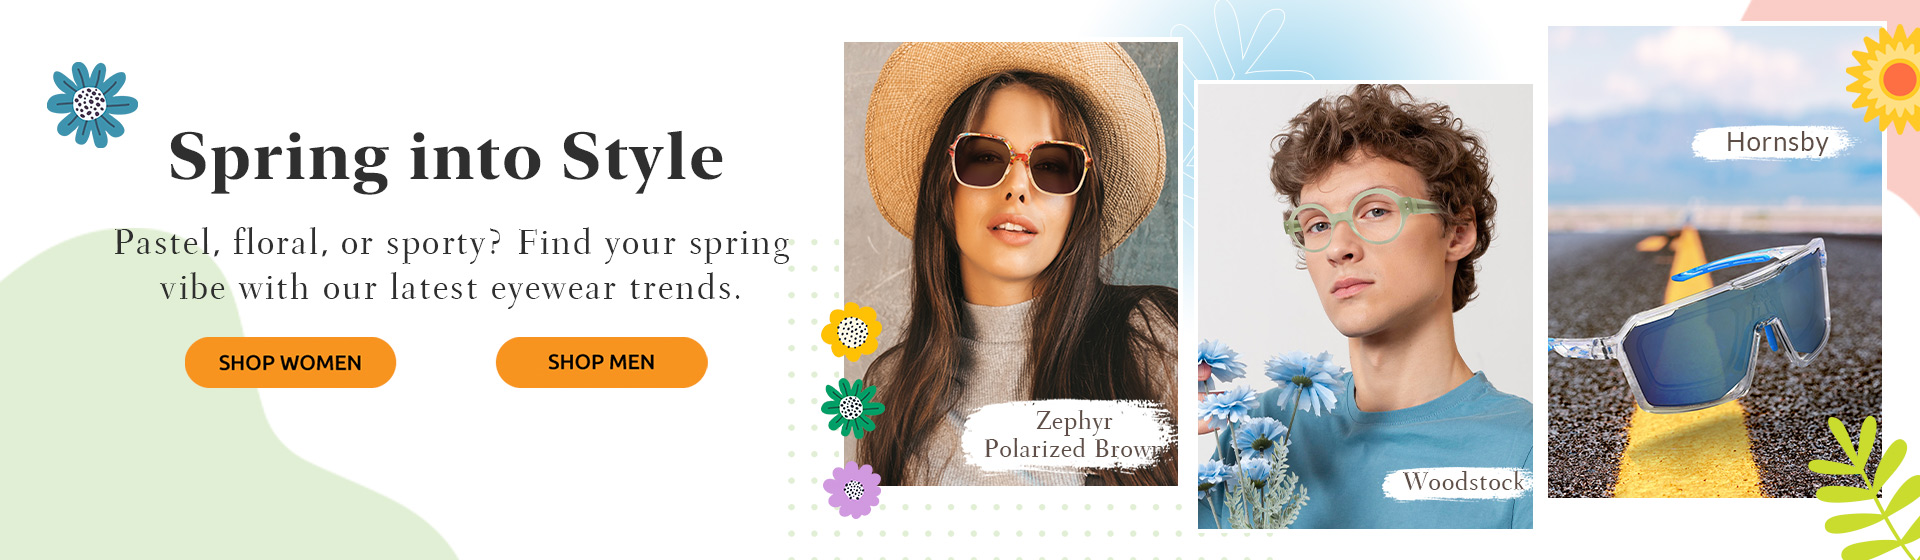 Spring into Style